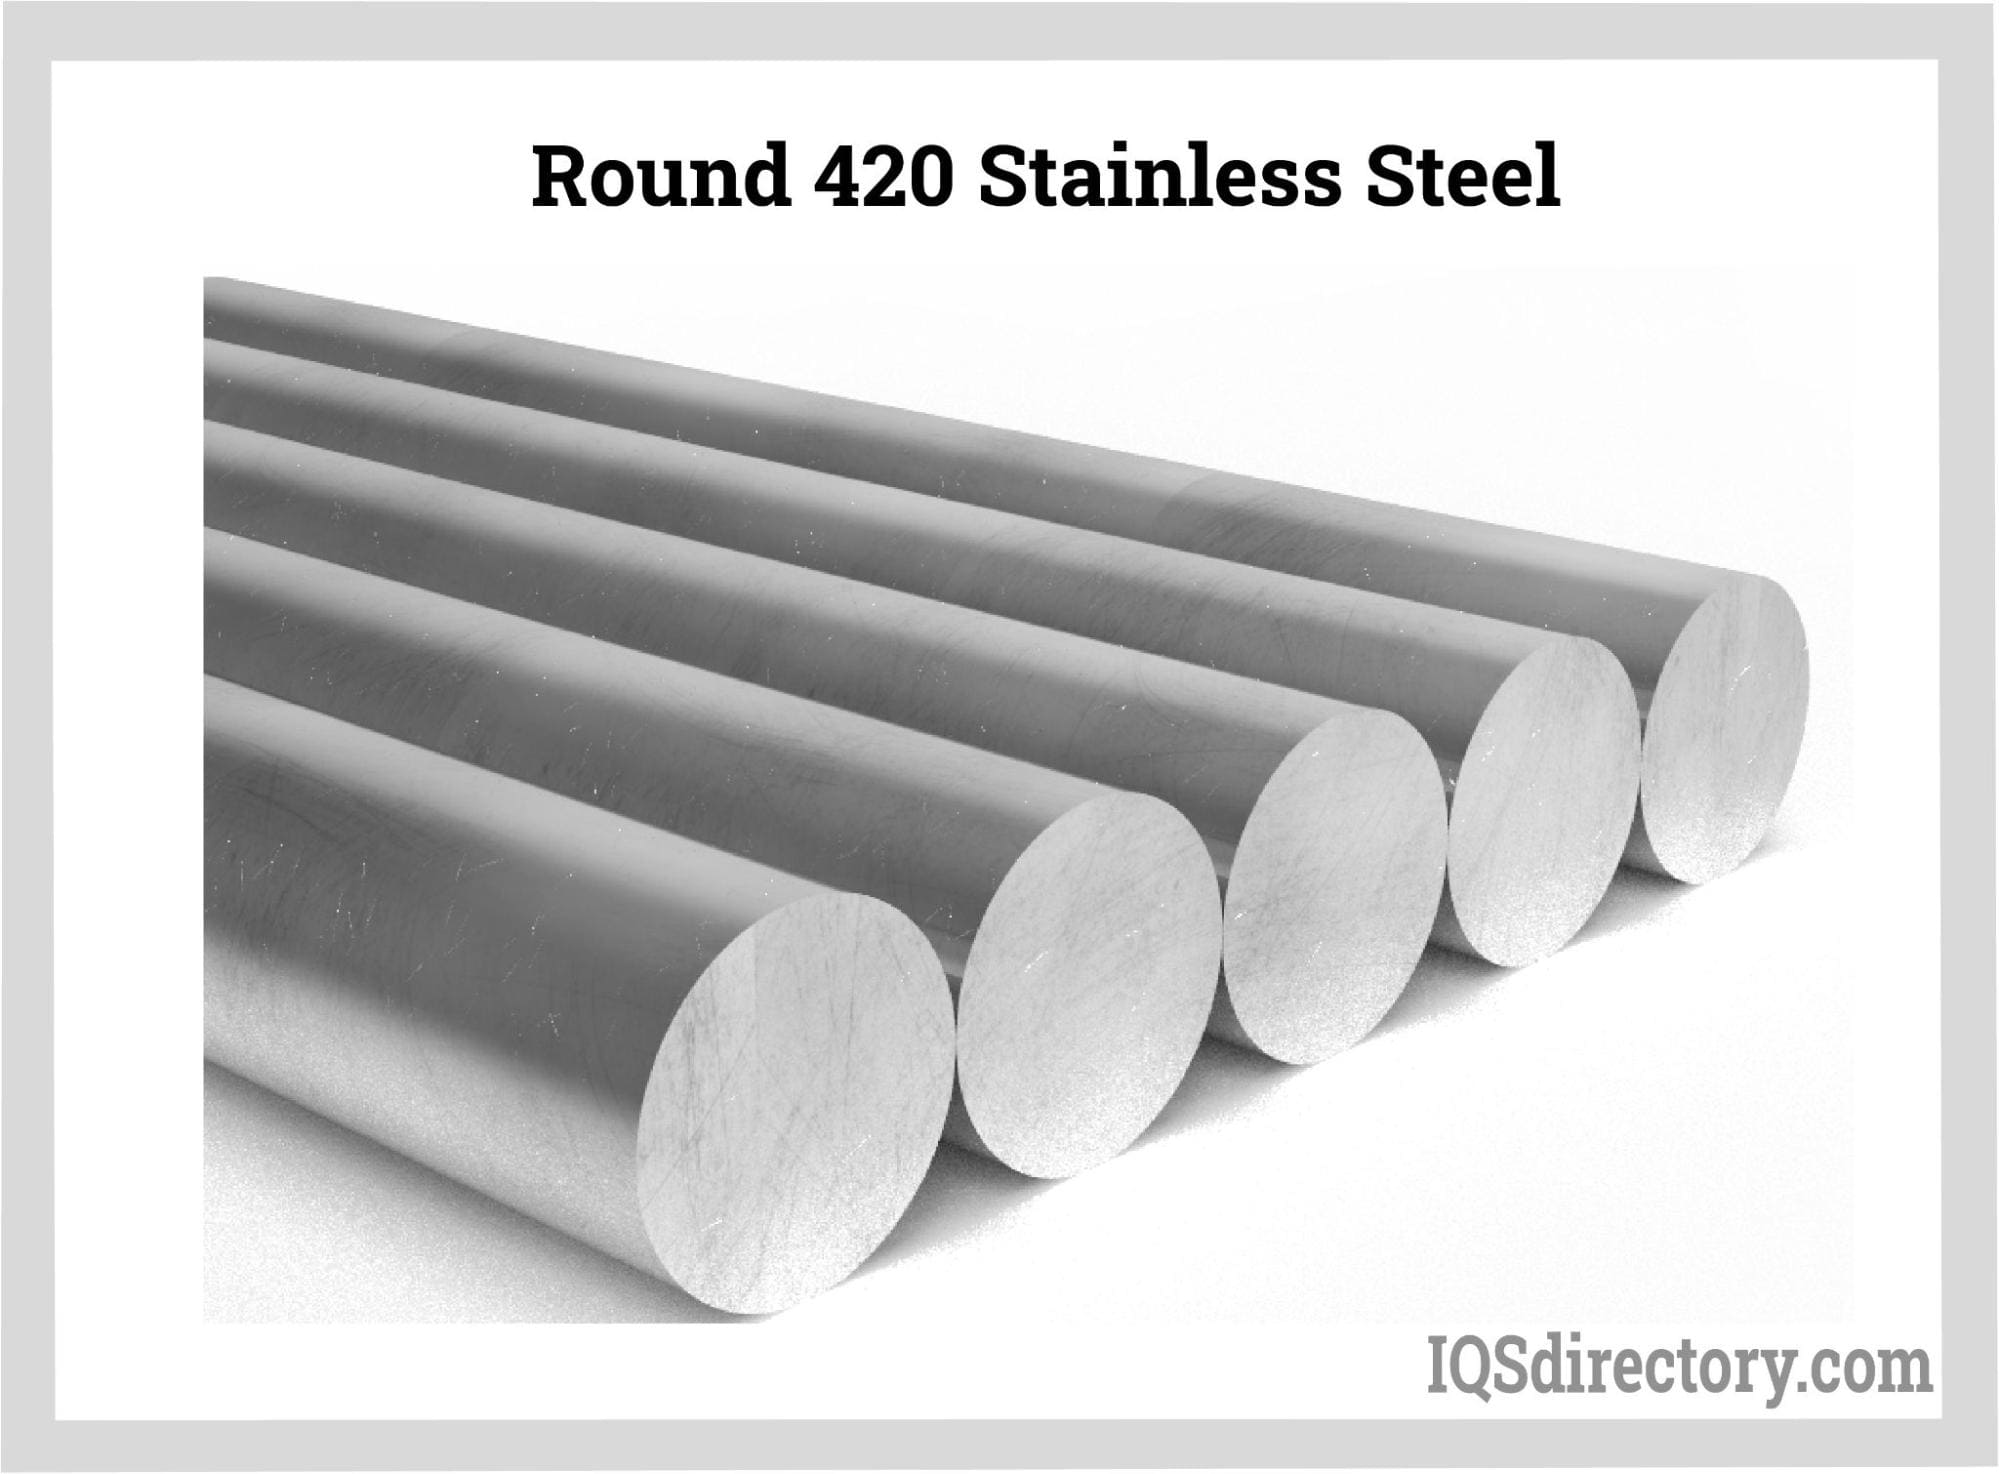 Round 420 Stainless Steel